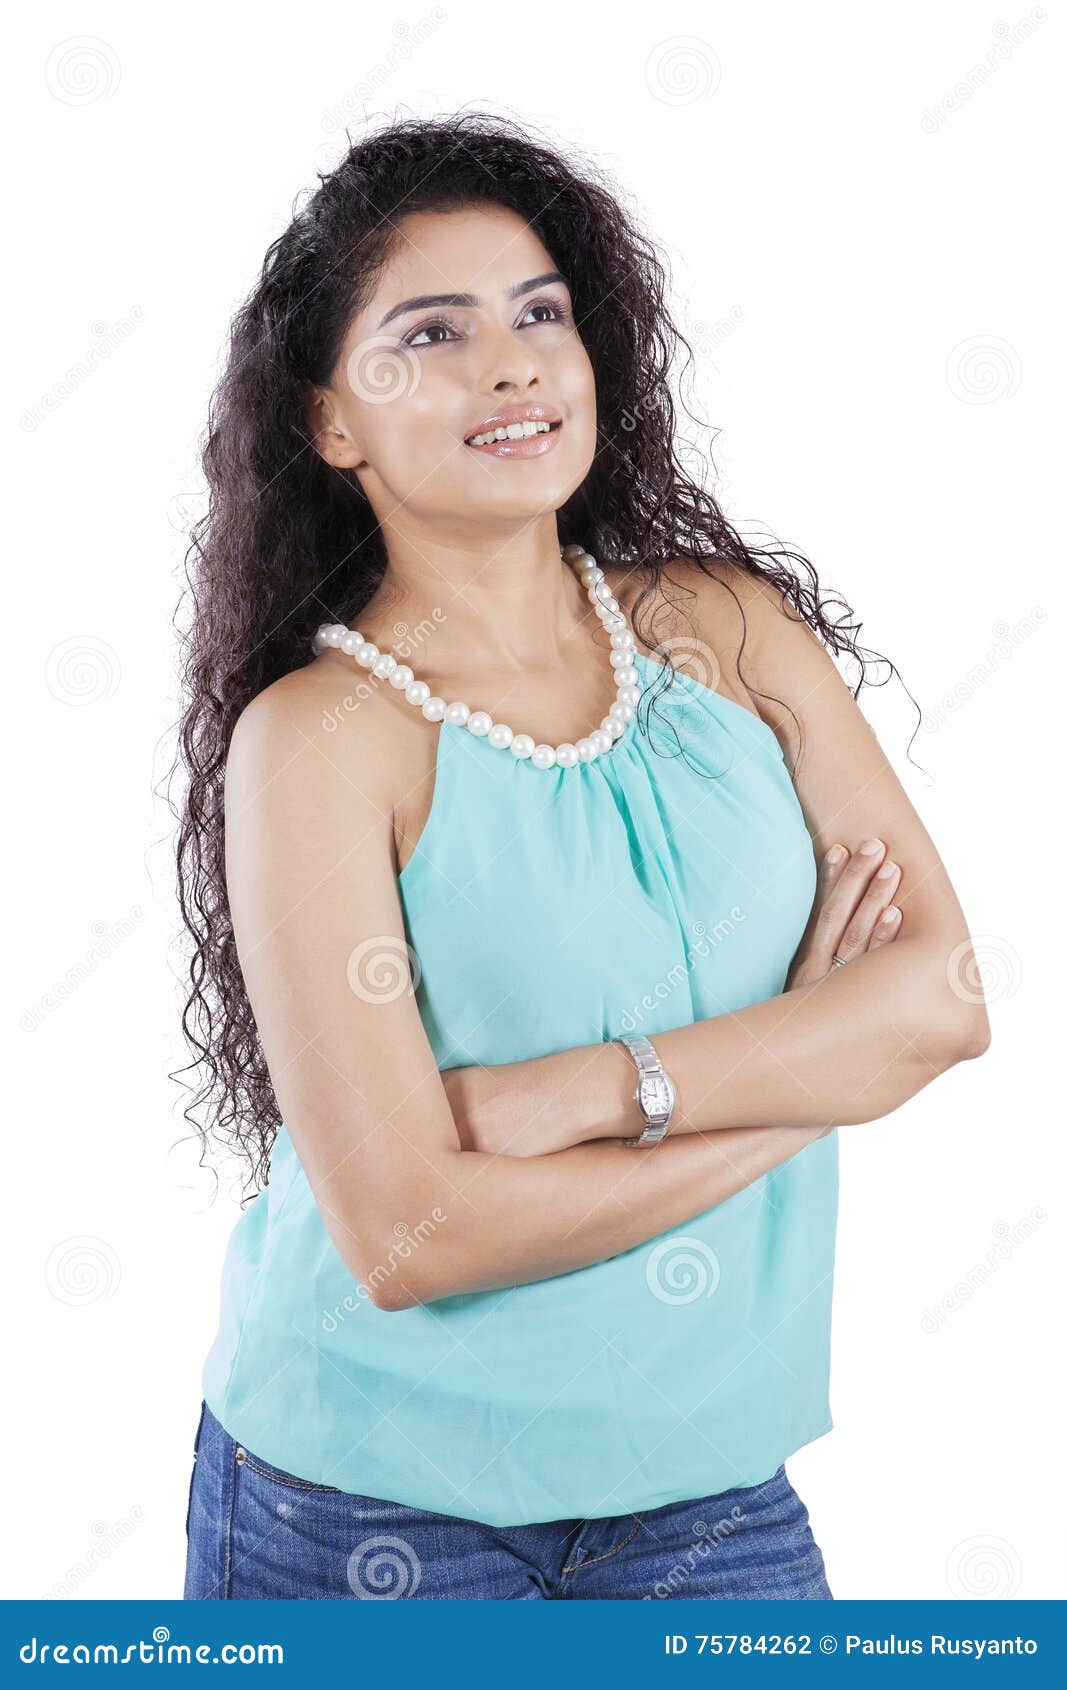 Muslim Woman With Thinking Expression Stock Image - Image 